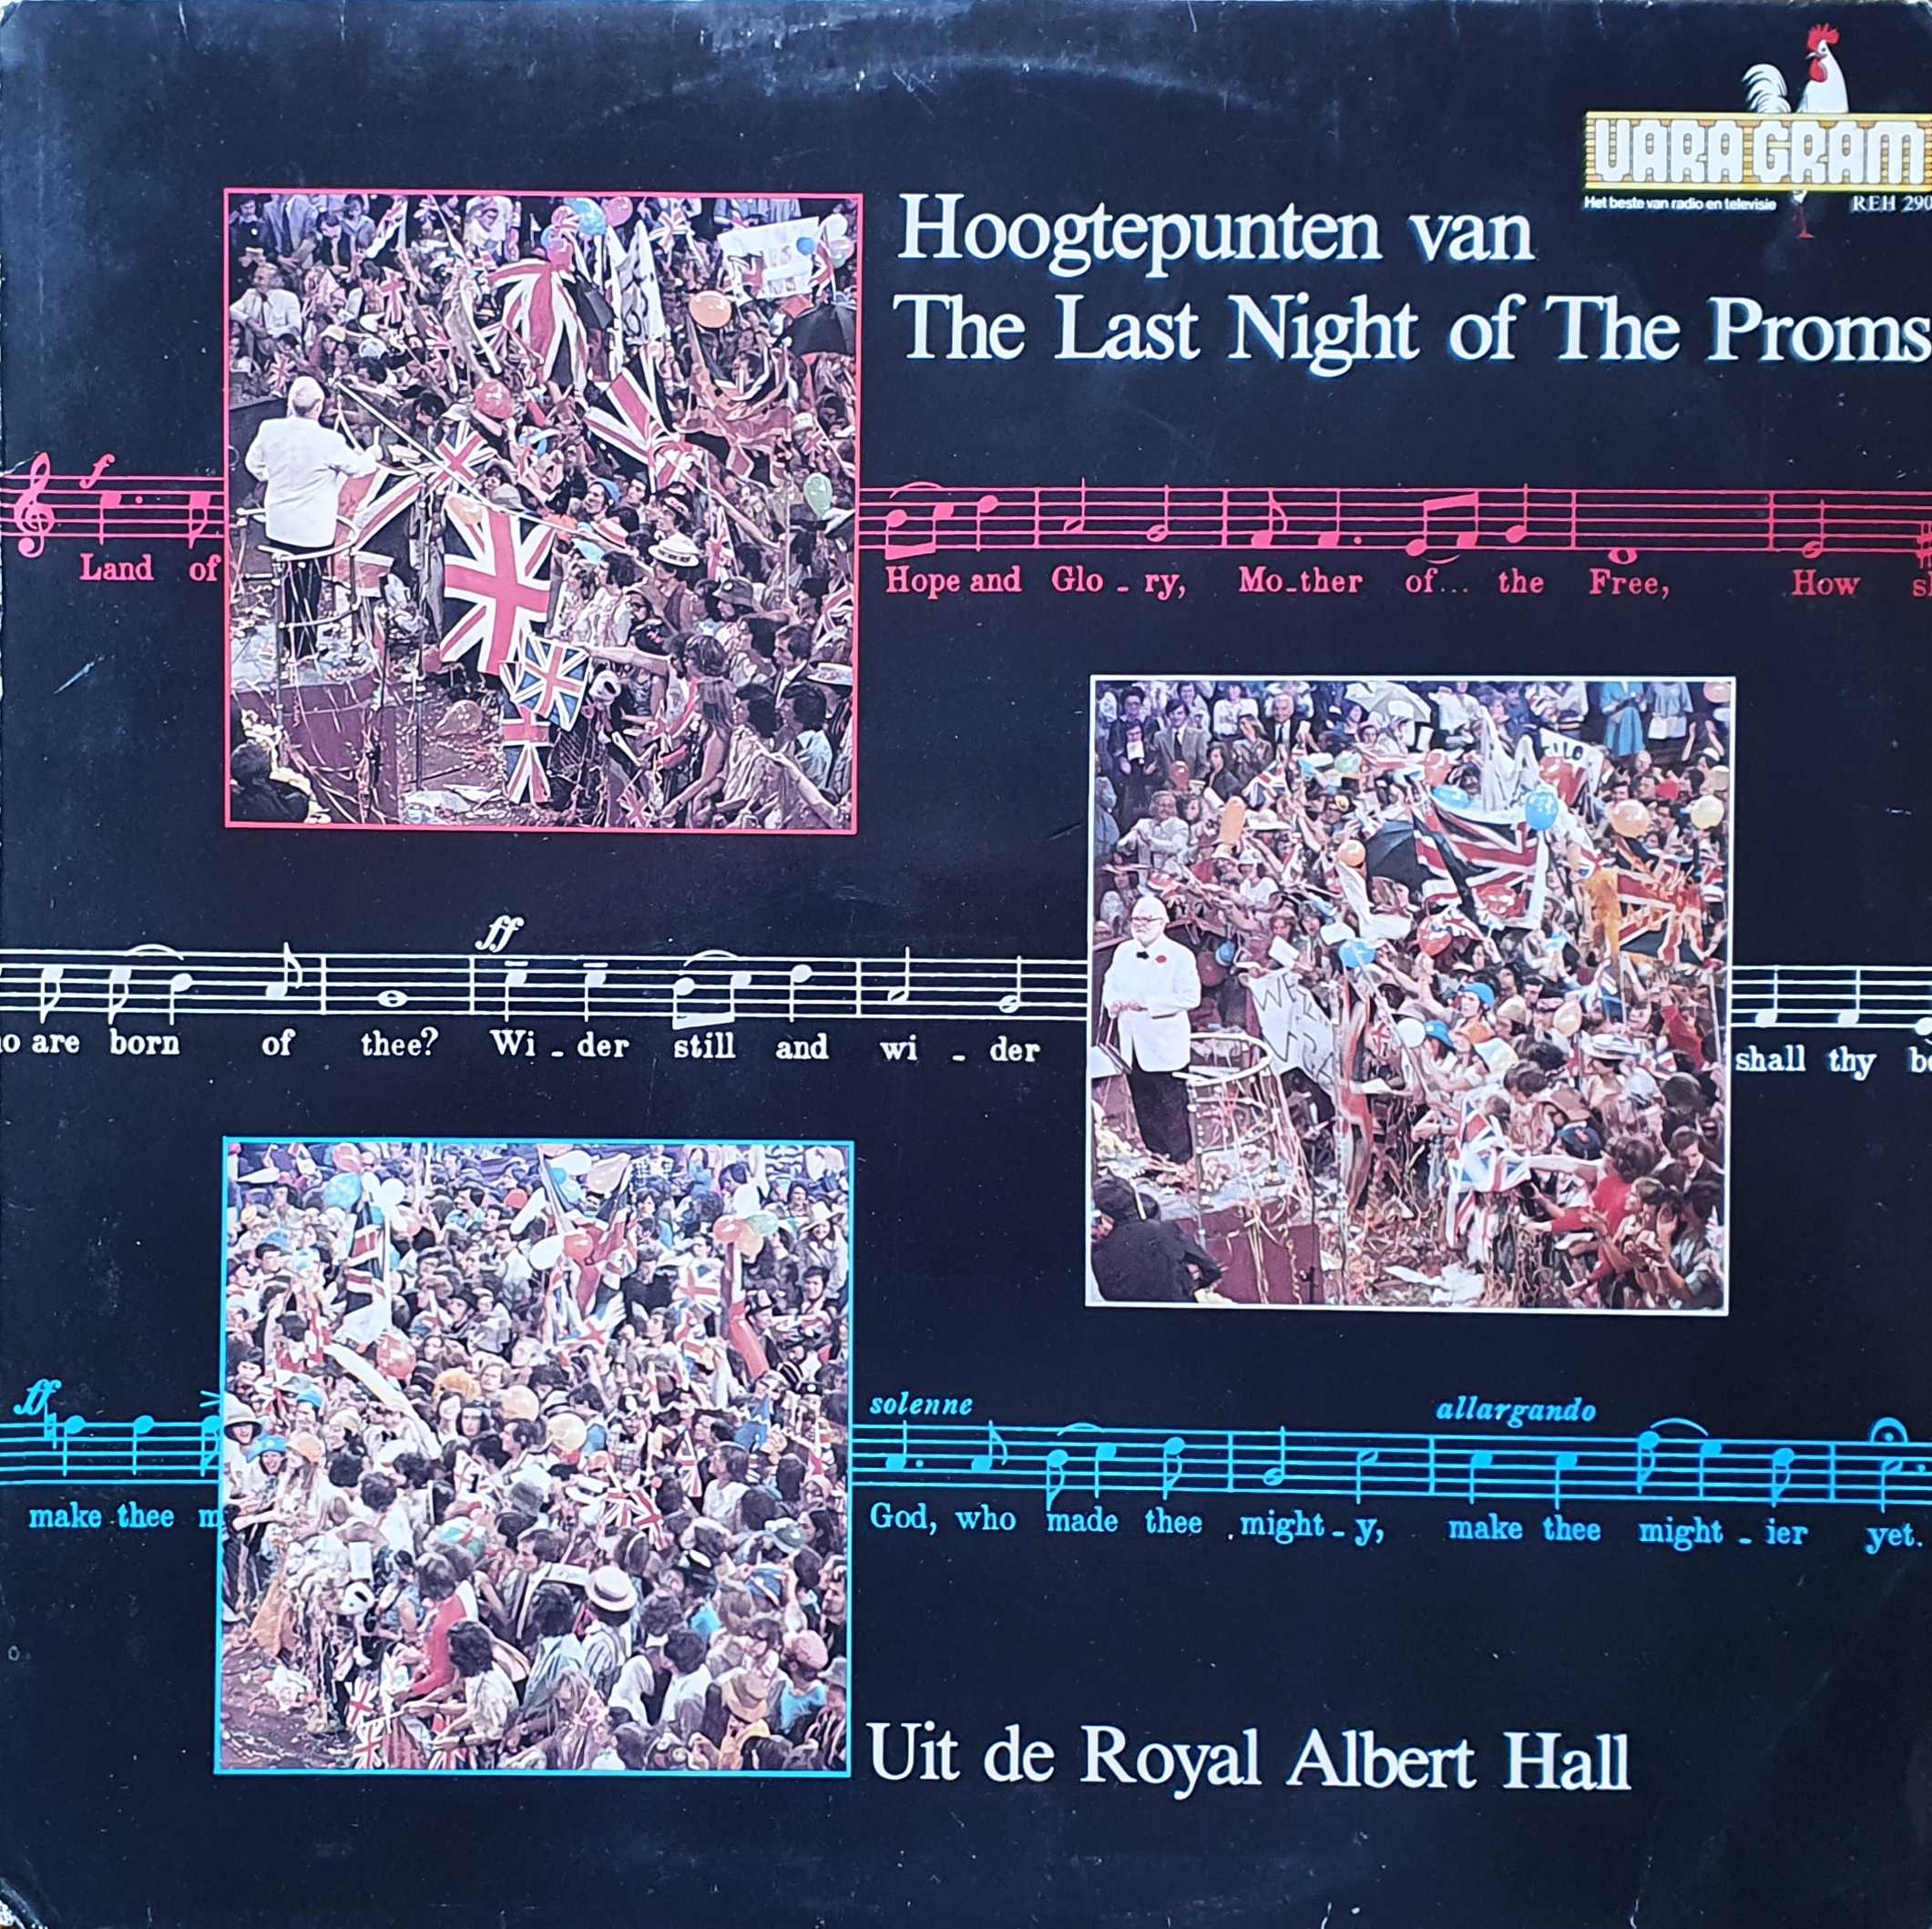 Picture of REH 290-iD Hoogtepunten van the last night of The Proms (Dutch import) by artist Various from the BBC albums - Records and Tapes library